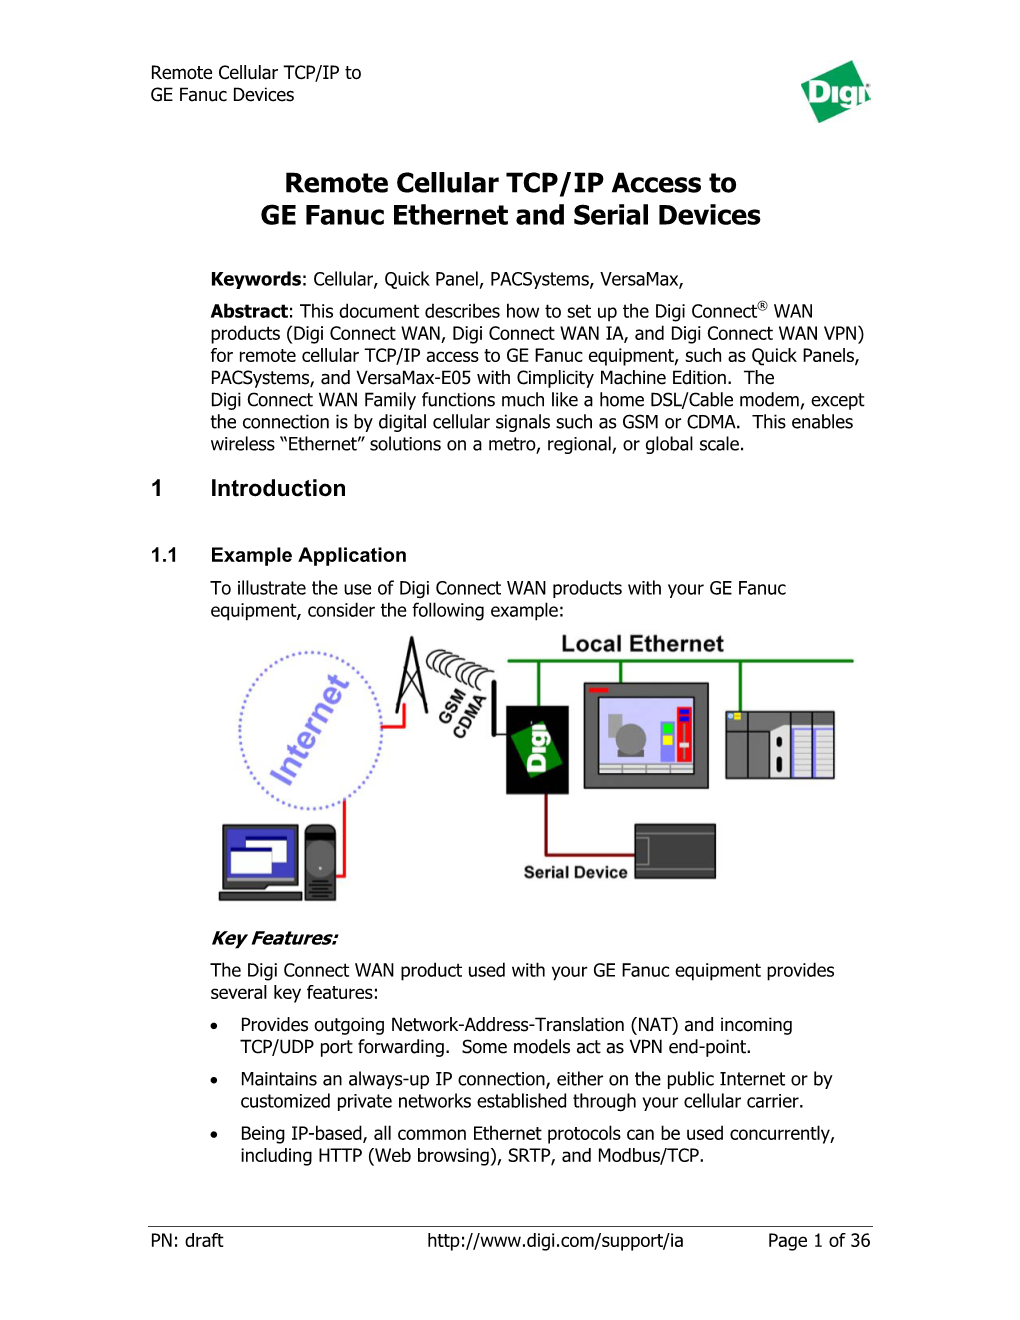 Remote Cellular TCP/IP Access to GE Fanuc Ethernet and Serial Devices